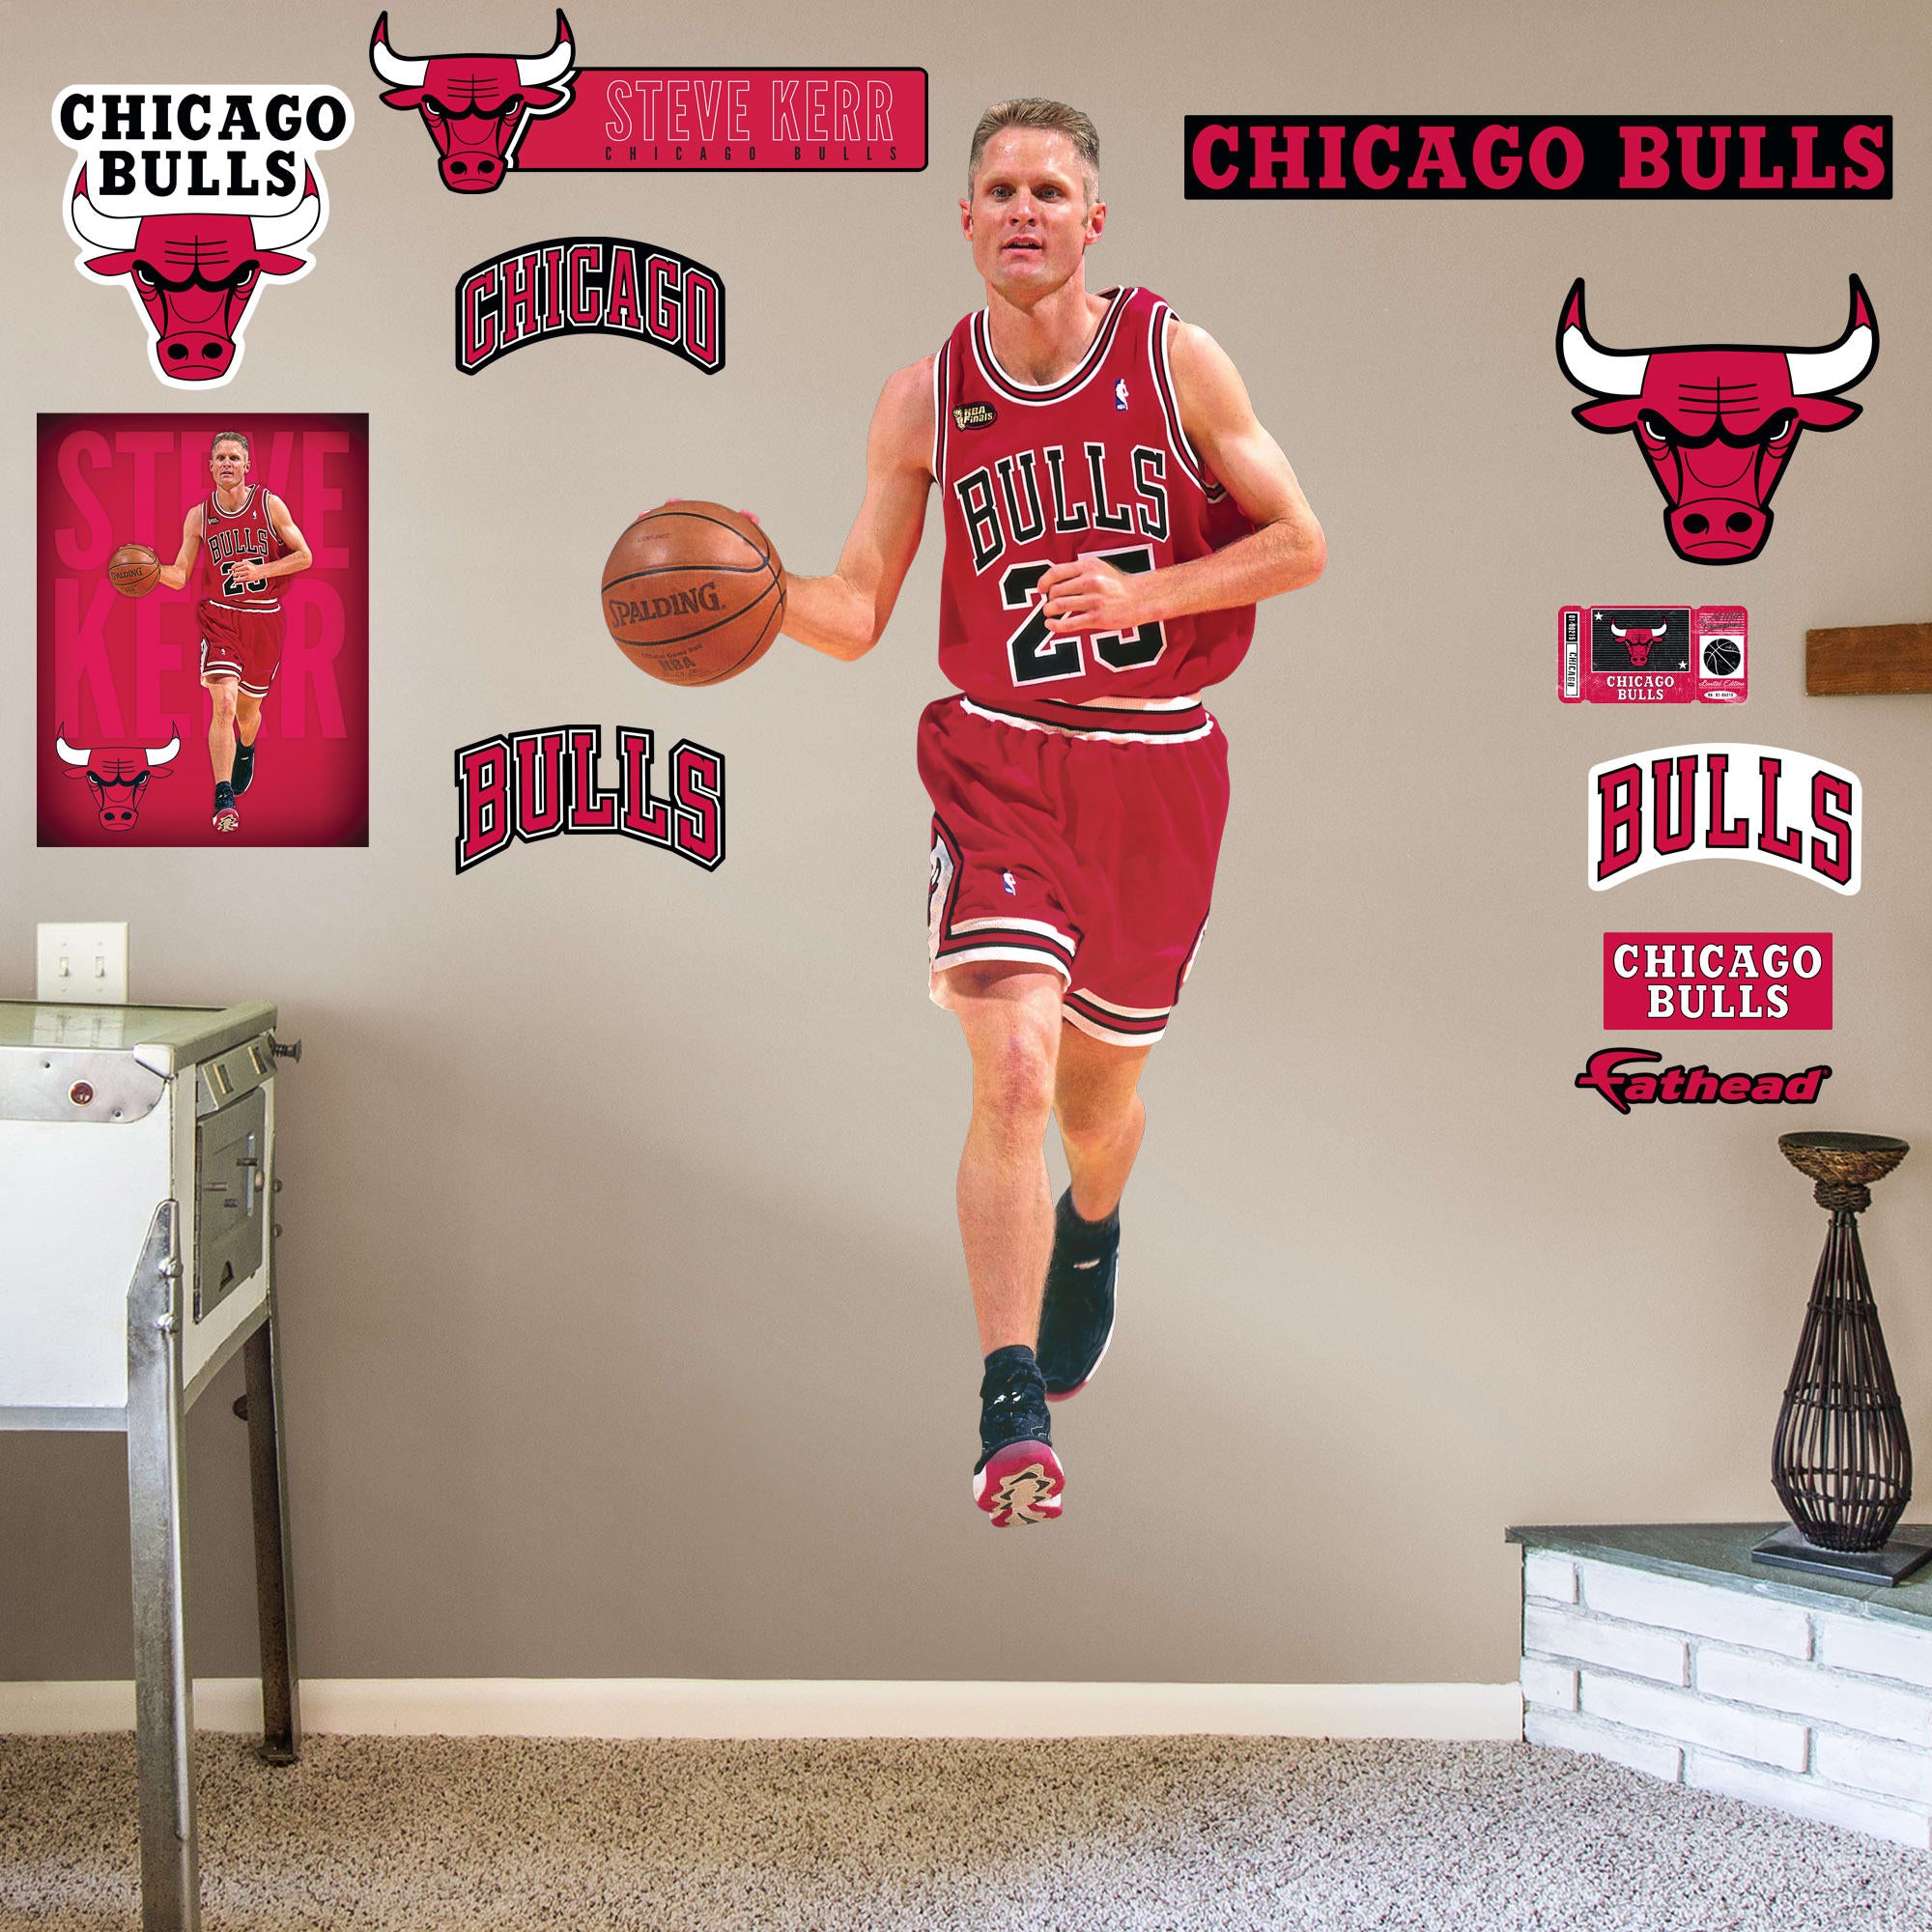 Steve Kerr for Chicago Bulls - Officially Licensed NBA Removable Wall Decal Life-Size Athlete + 10 Decals (39"W x 78"H) by Fathe